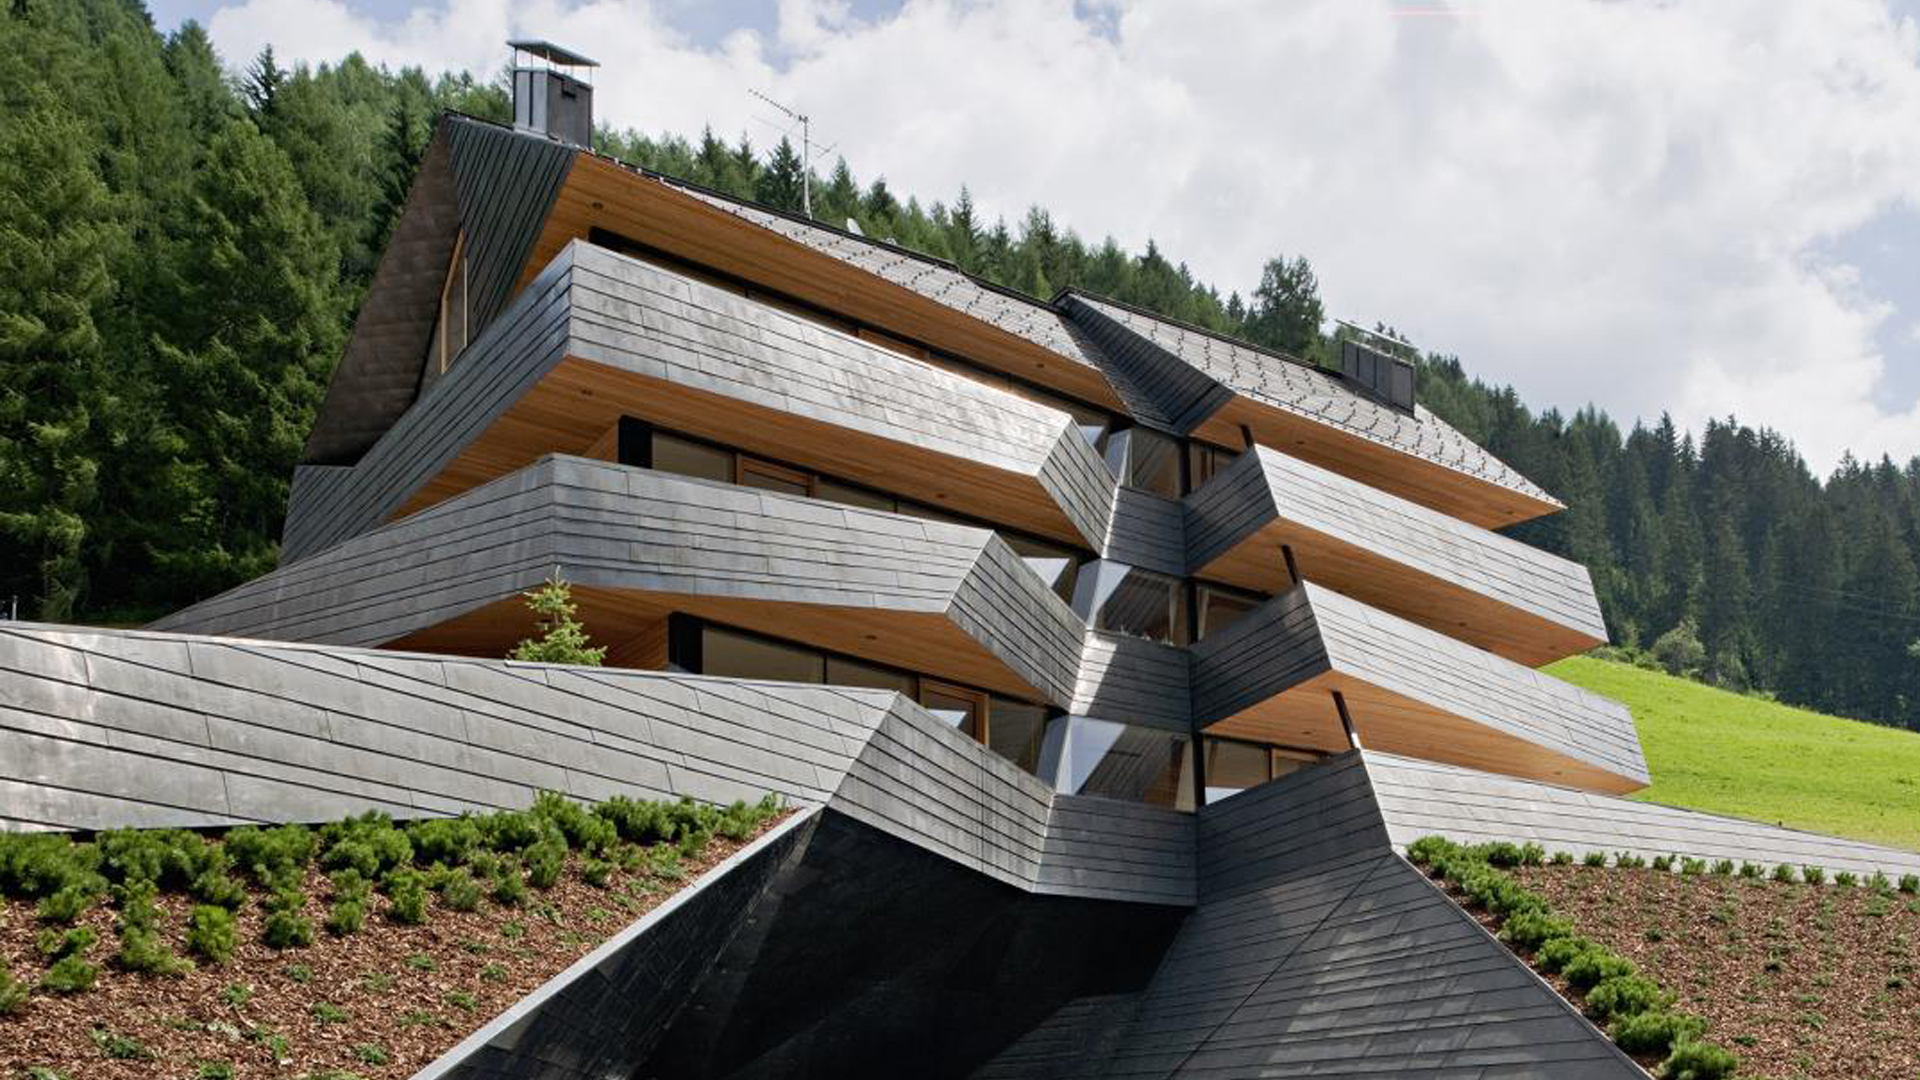 Wooden residences on the Dolomites